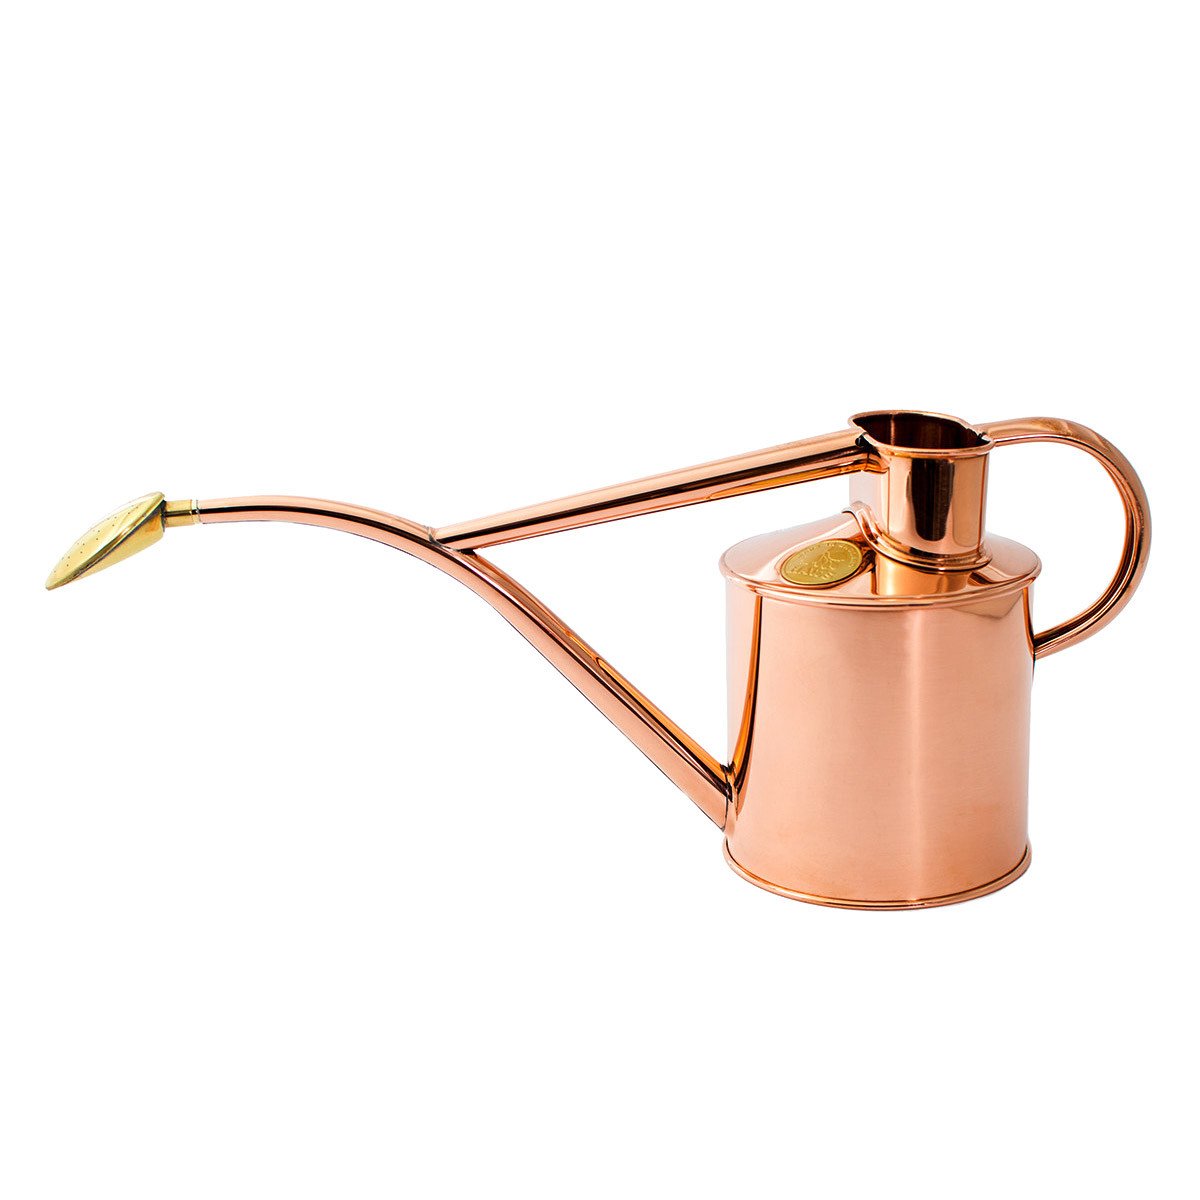 Copper Watering Can - The Future Kept - 1